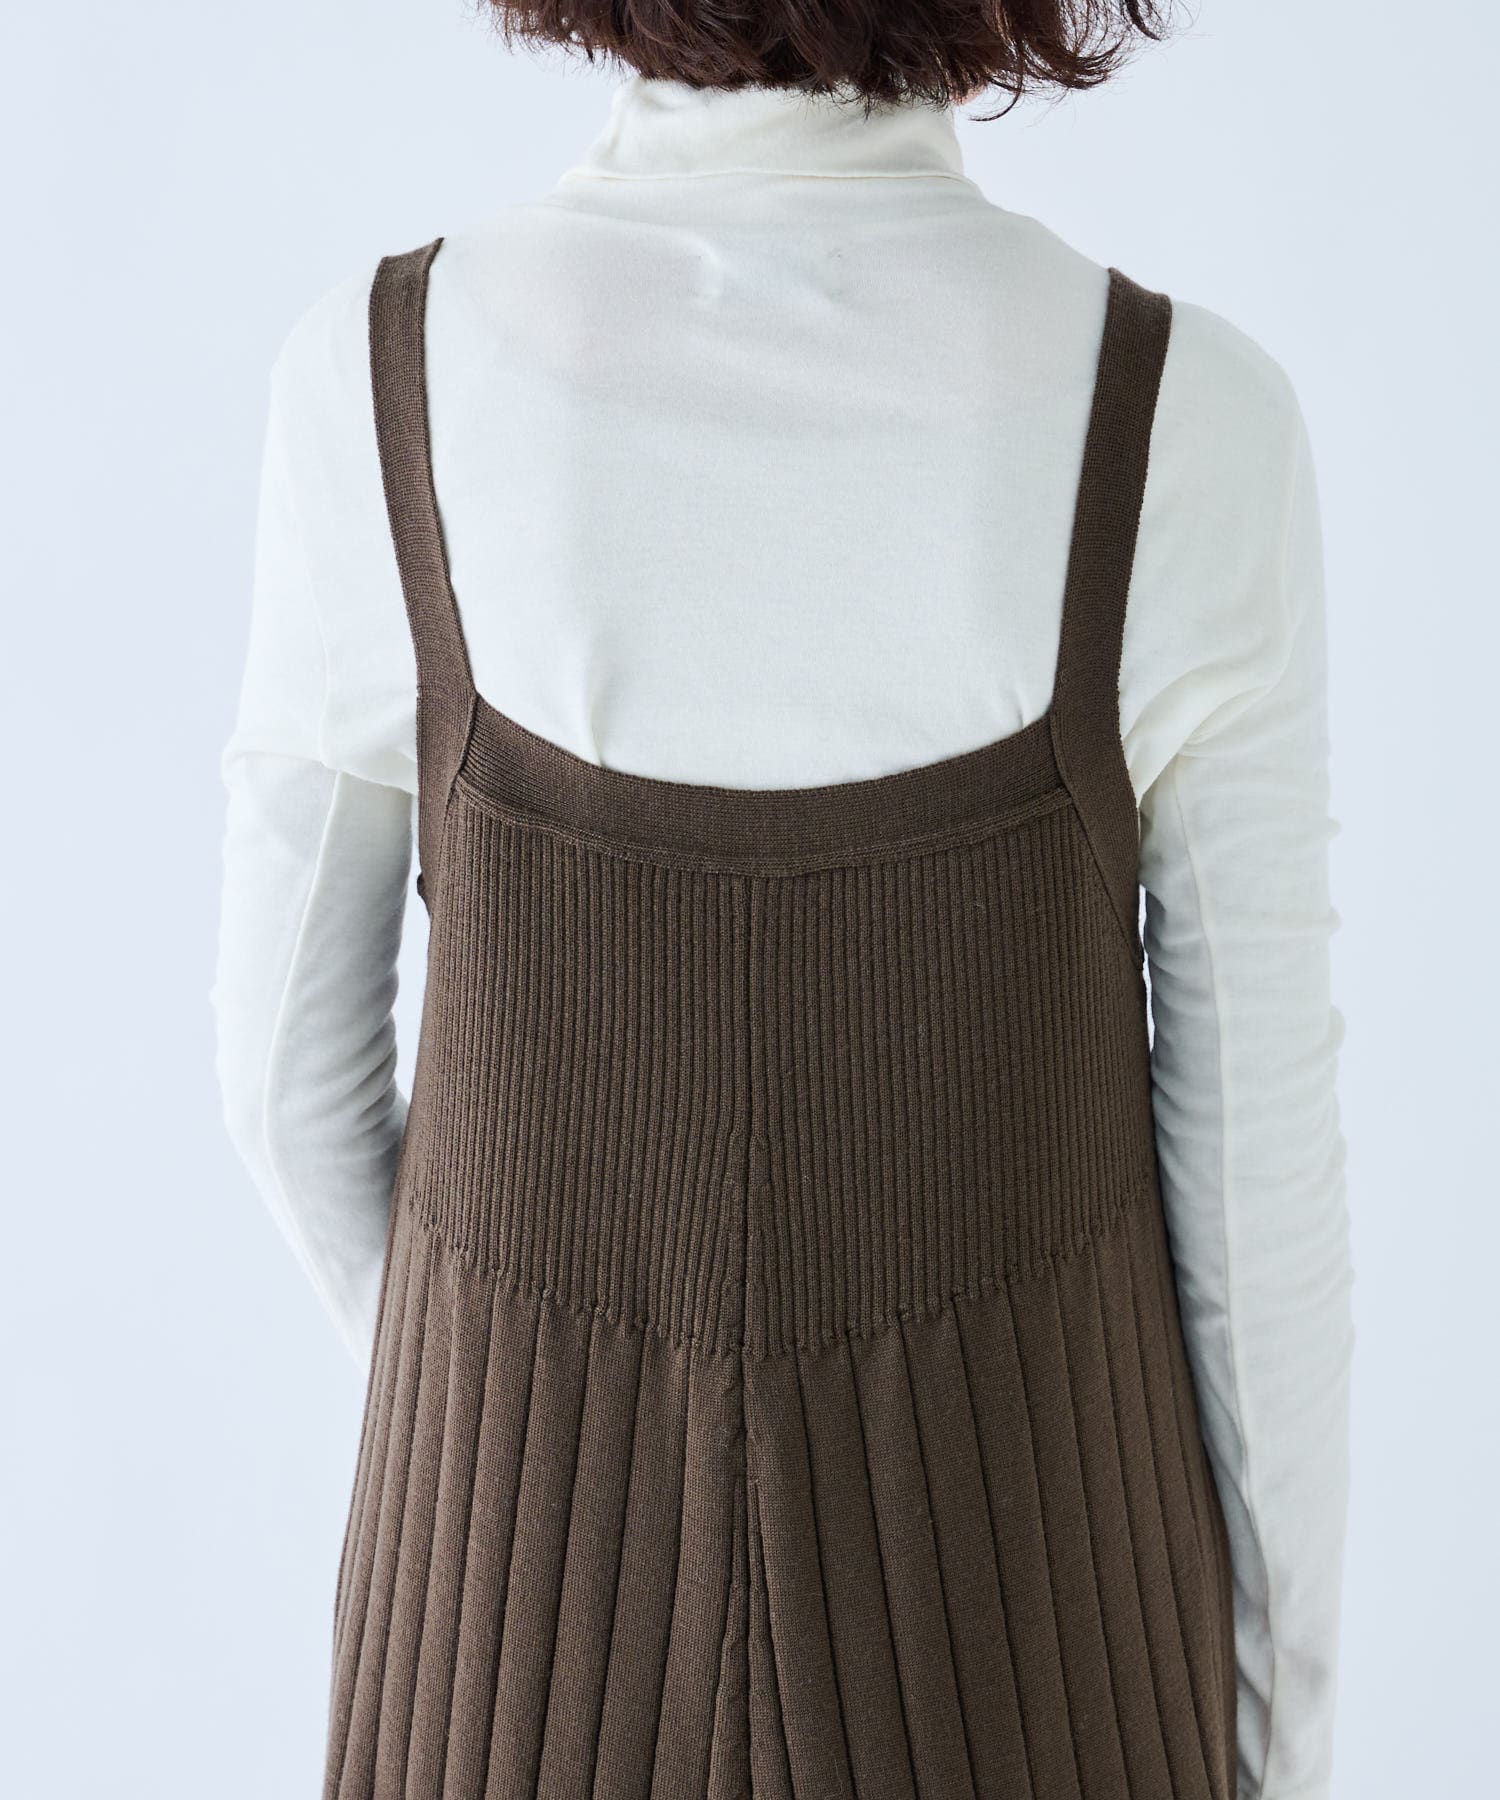 BLOOM&BRANCH(ブルームアンドブランチ) Phlannèl / Worsted Wool Camisole Dress